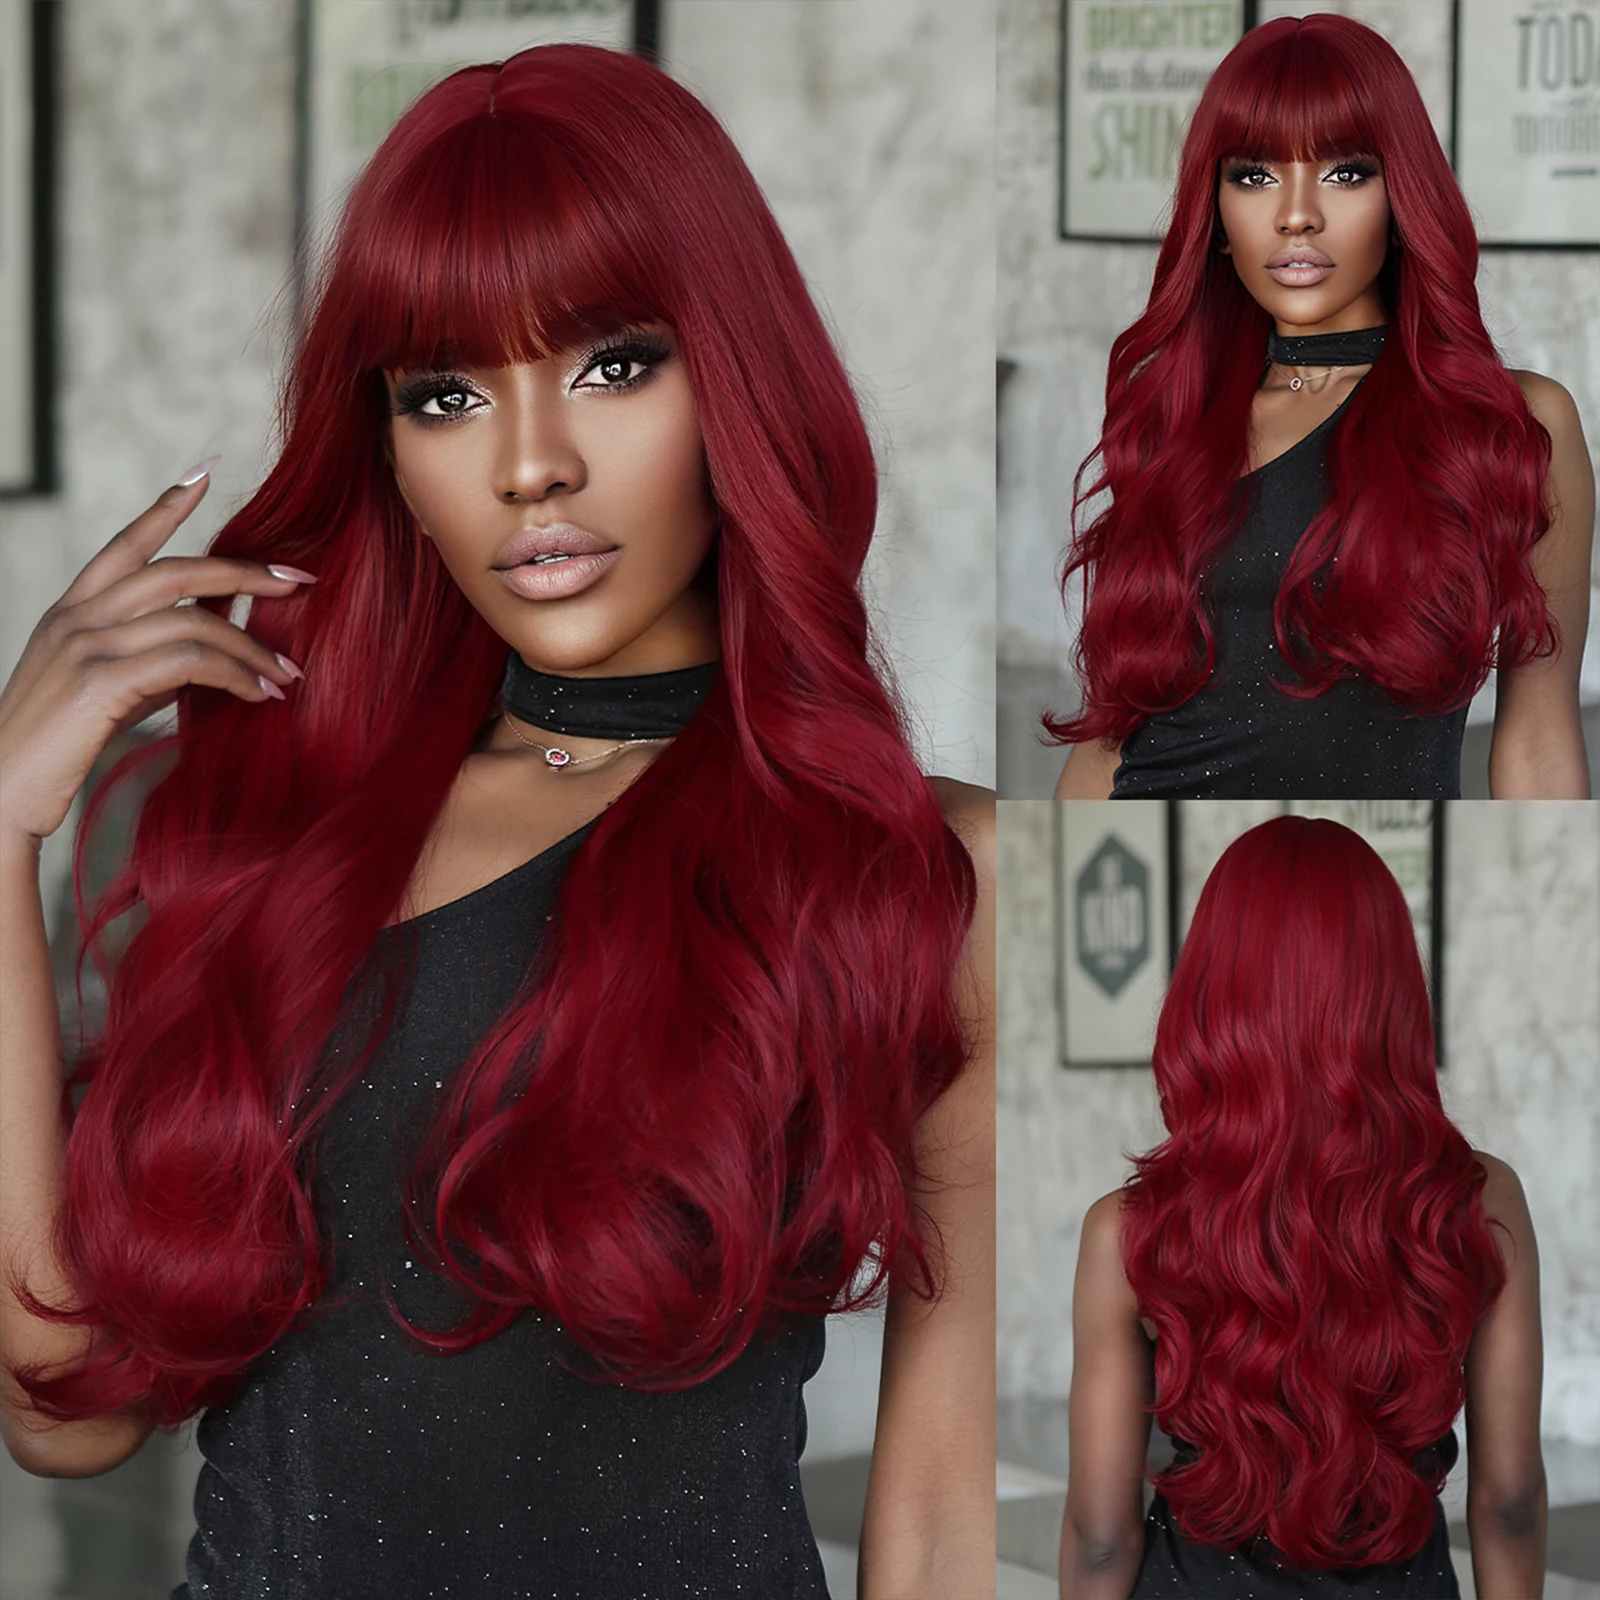 

Red Long Wavy Synthetic Wig Curly Wine Burgundy Red Wigs for Women Afro Cosplay Party Natural Hair With Bangs Heat Resistant Wig